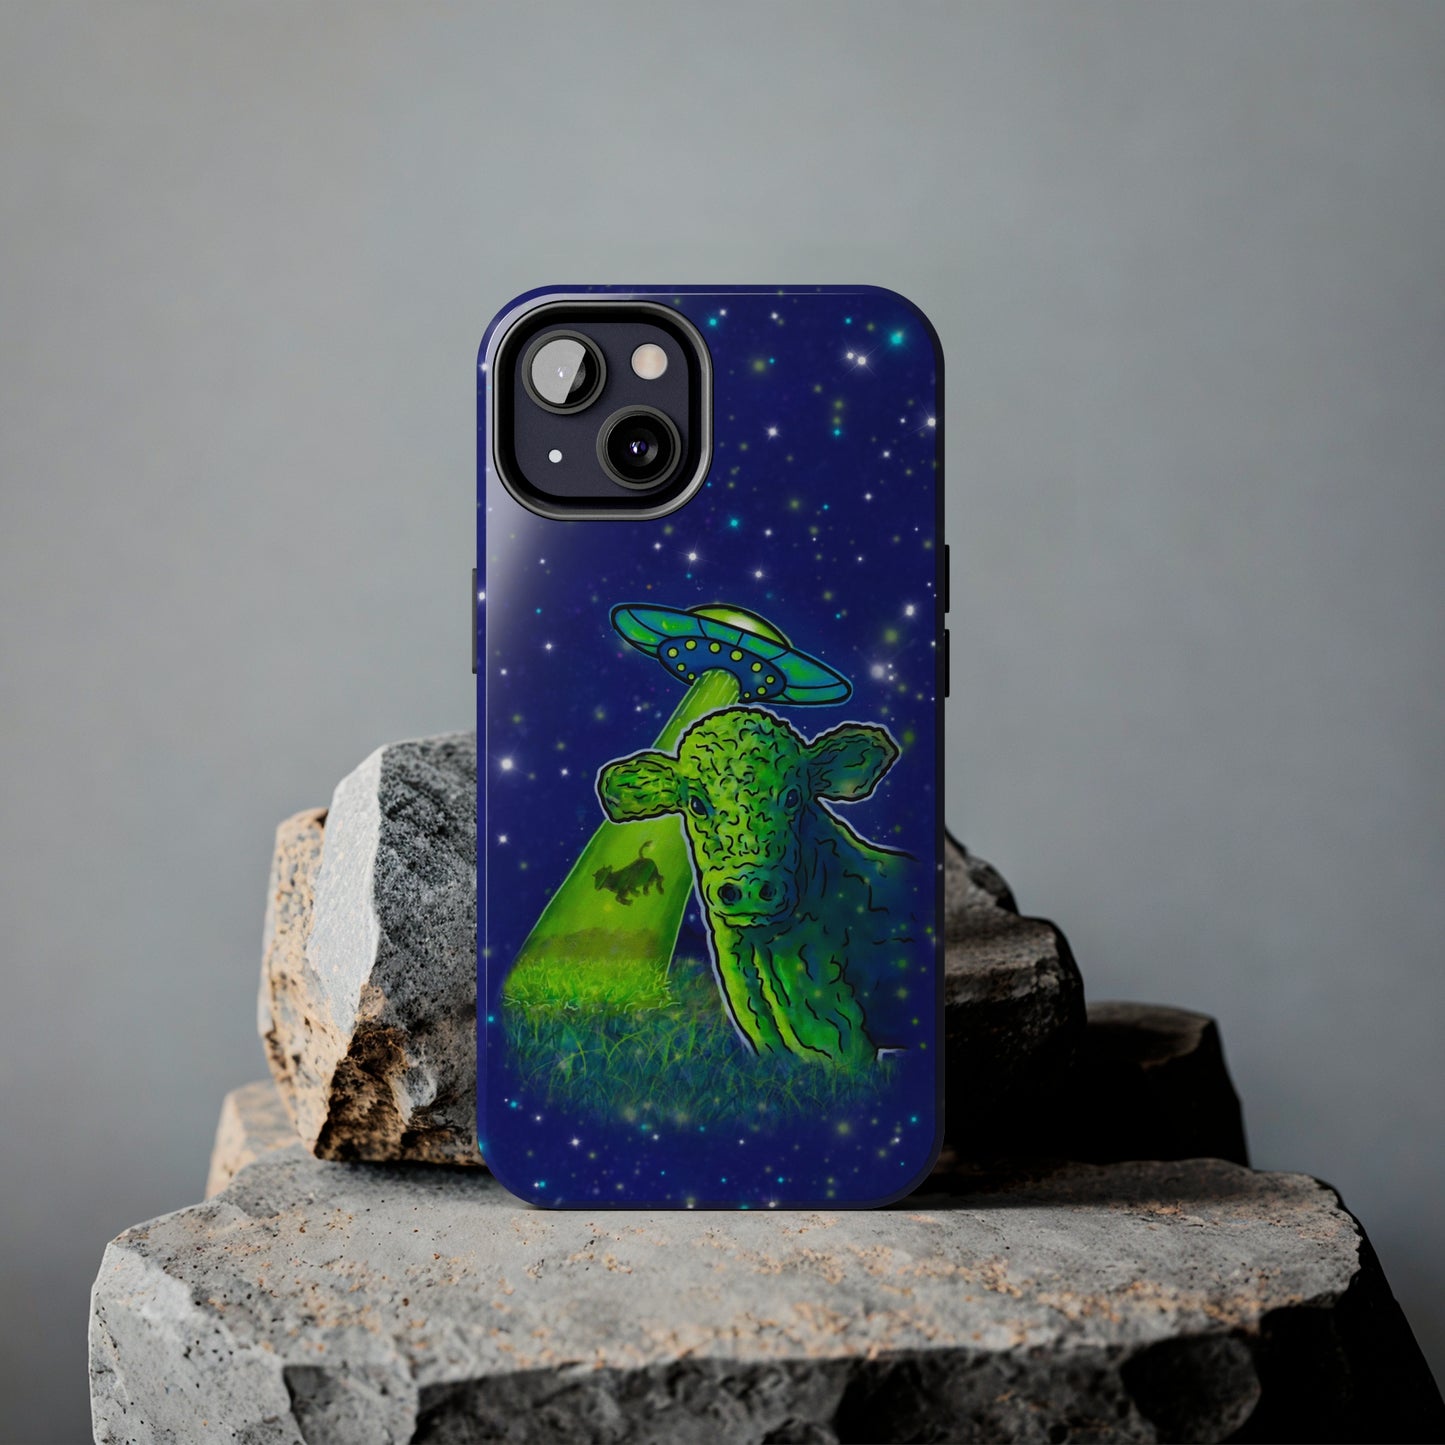 “Cows In Outer Space" iPhone Case - C.V. Designs Abducted Series